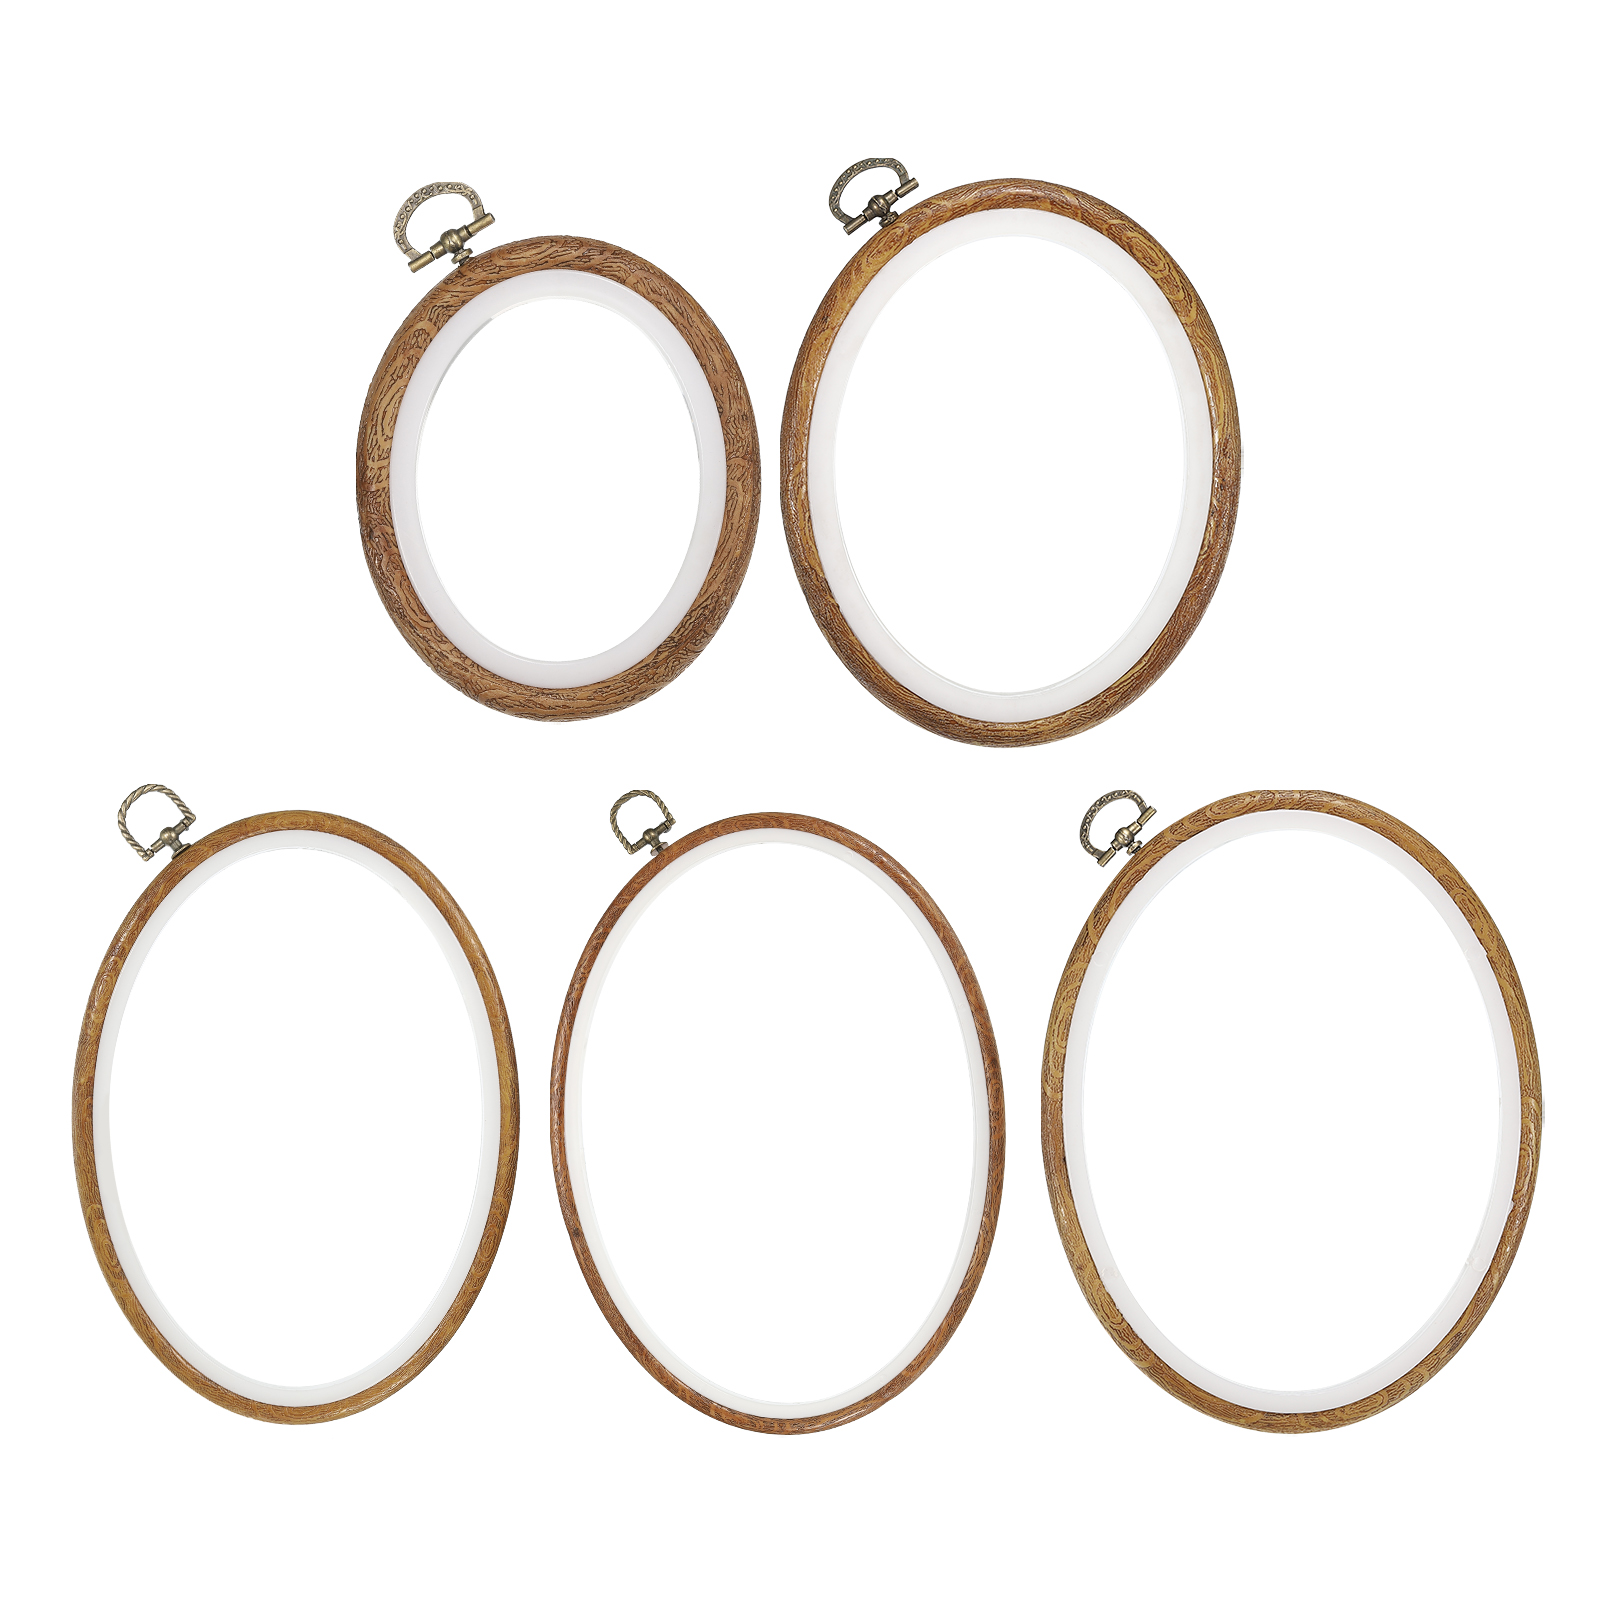 Oval Embroidery Hoops Imitated Wood Cross Stitch Hoop Frame Display Ring  Set, 5 Sizes 5 Pack